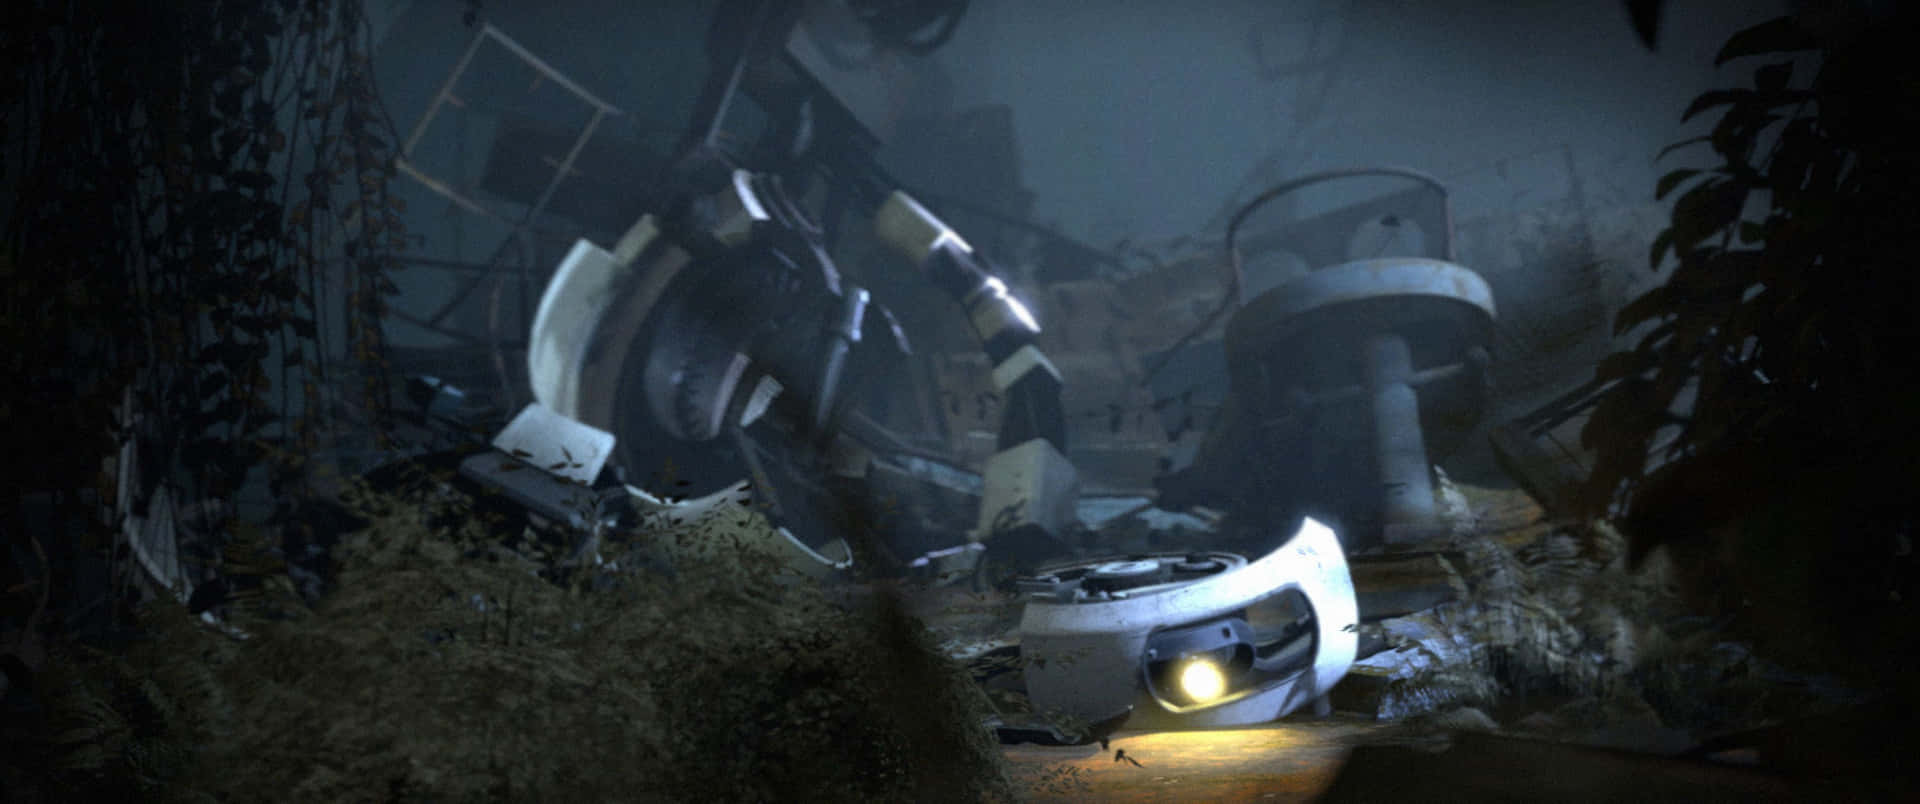 Science and Technology Unite In "Portal 2"